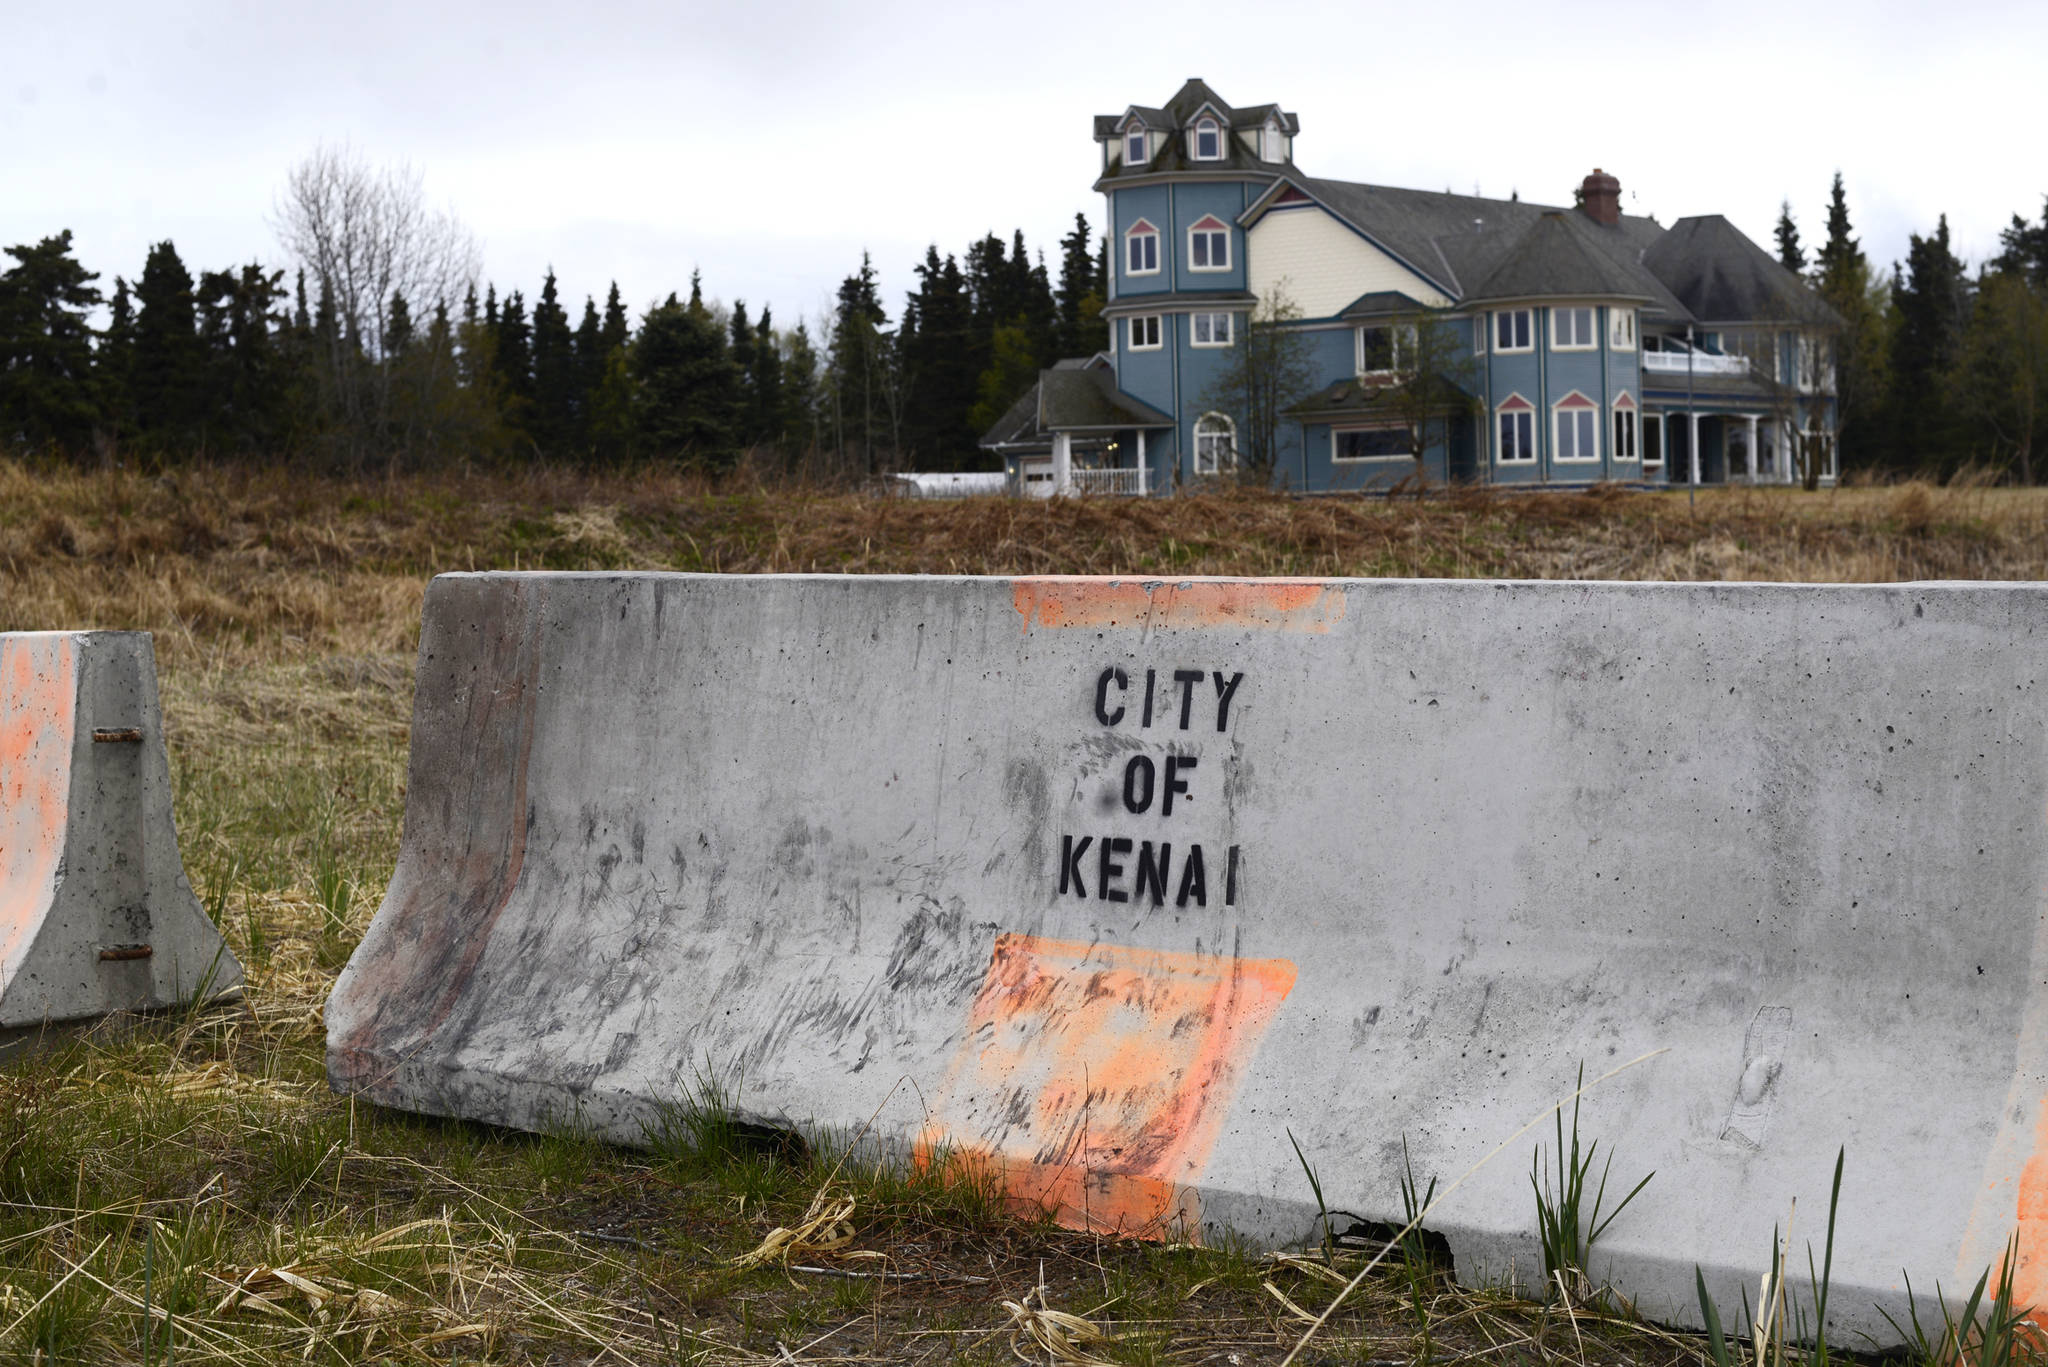 The four-story Dragseth Mansion, which the Kenai municipal government sold on Wednesday to the transportation and contraction company PRL Logistics for $825,000, sits on Kenai’s south beach Friday, May 19, 2017 in Kenai. A concrete barrier blocks the southern end of a city-owned airstrip that PRL is also seeking to buy from Kenai, requiring a permit from the Kenai Planning and Zoning Commission that will be discussed May 24. The airstrip parallels the beach alongside the Kenai River flats, valuable habitat for migratory birds, prompting concern from birders and bird advocacy groups. (Ben Boettger/Peninsula Clarion)